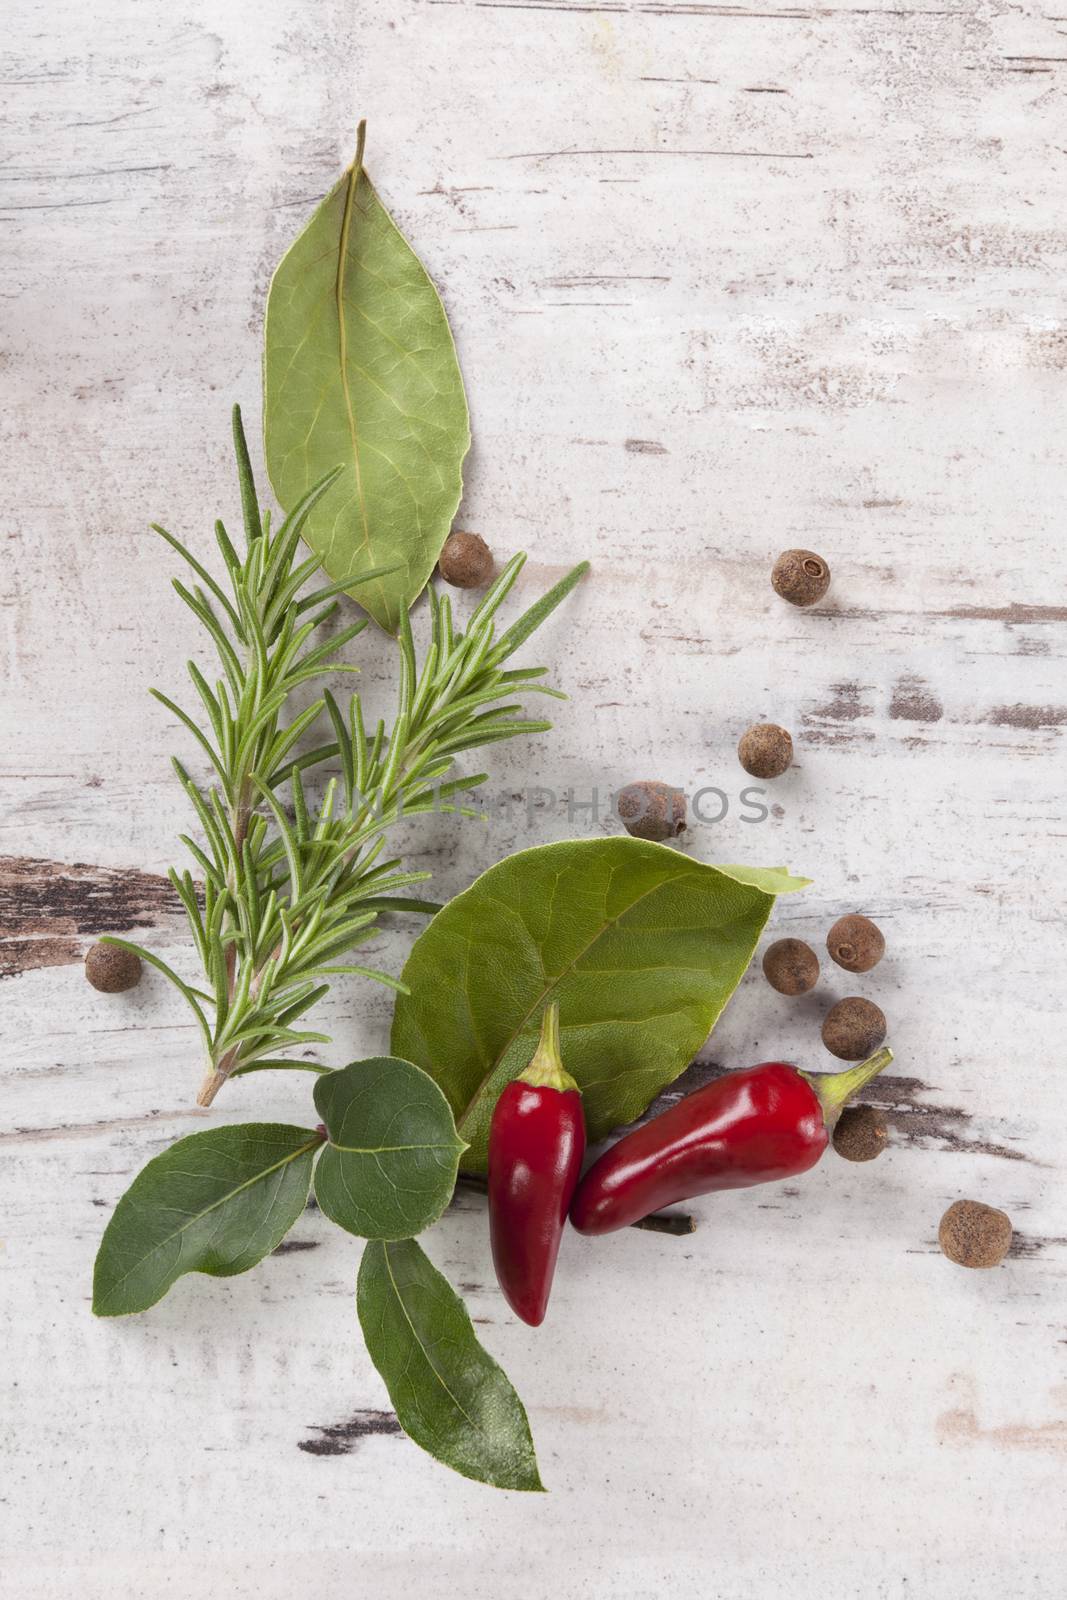 Bay leaves, spice and condiments wooden background. by eskymaks